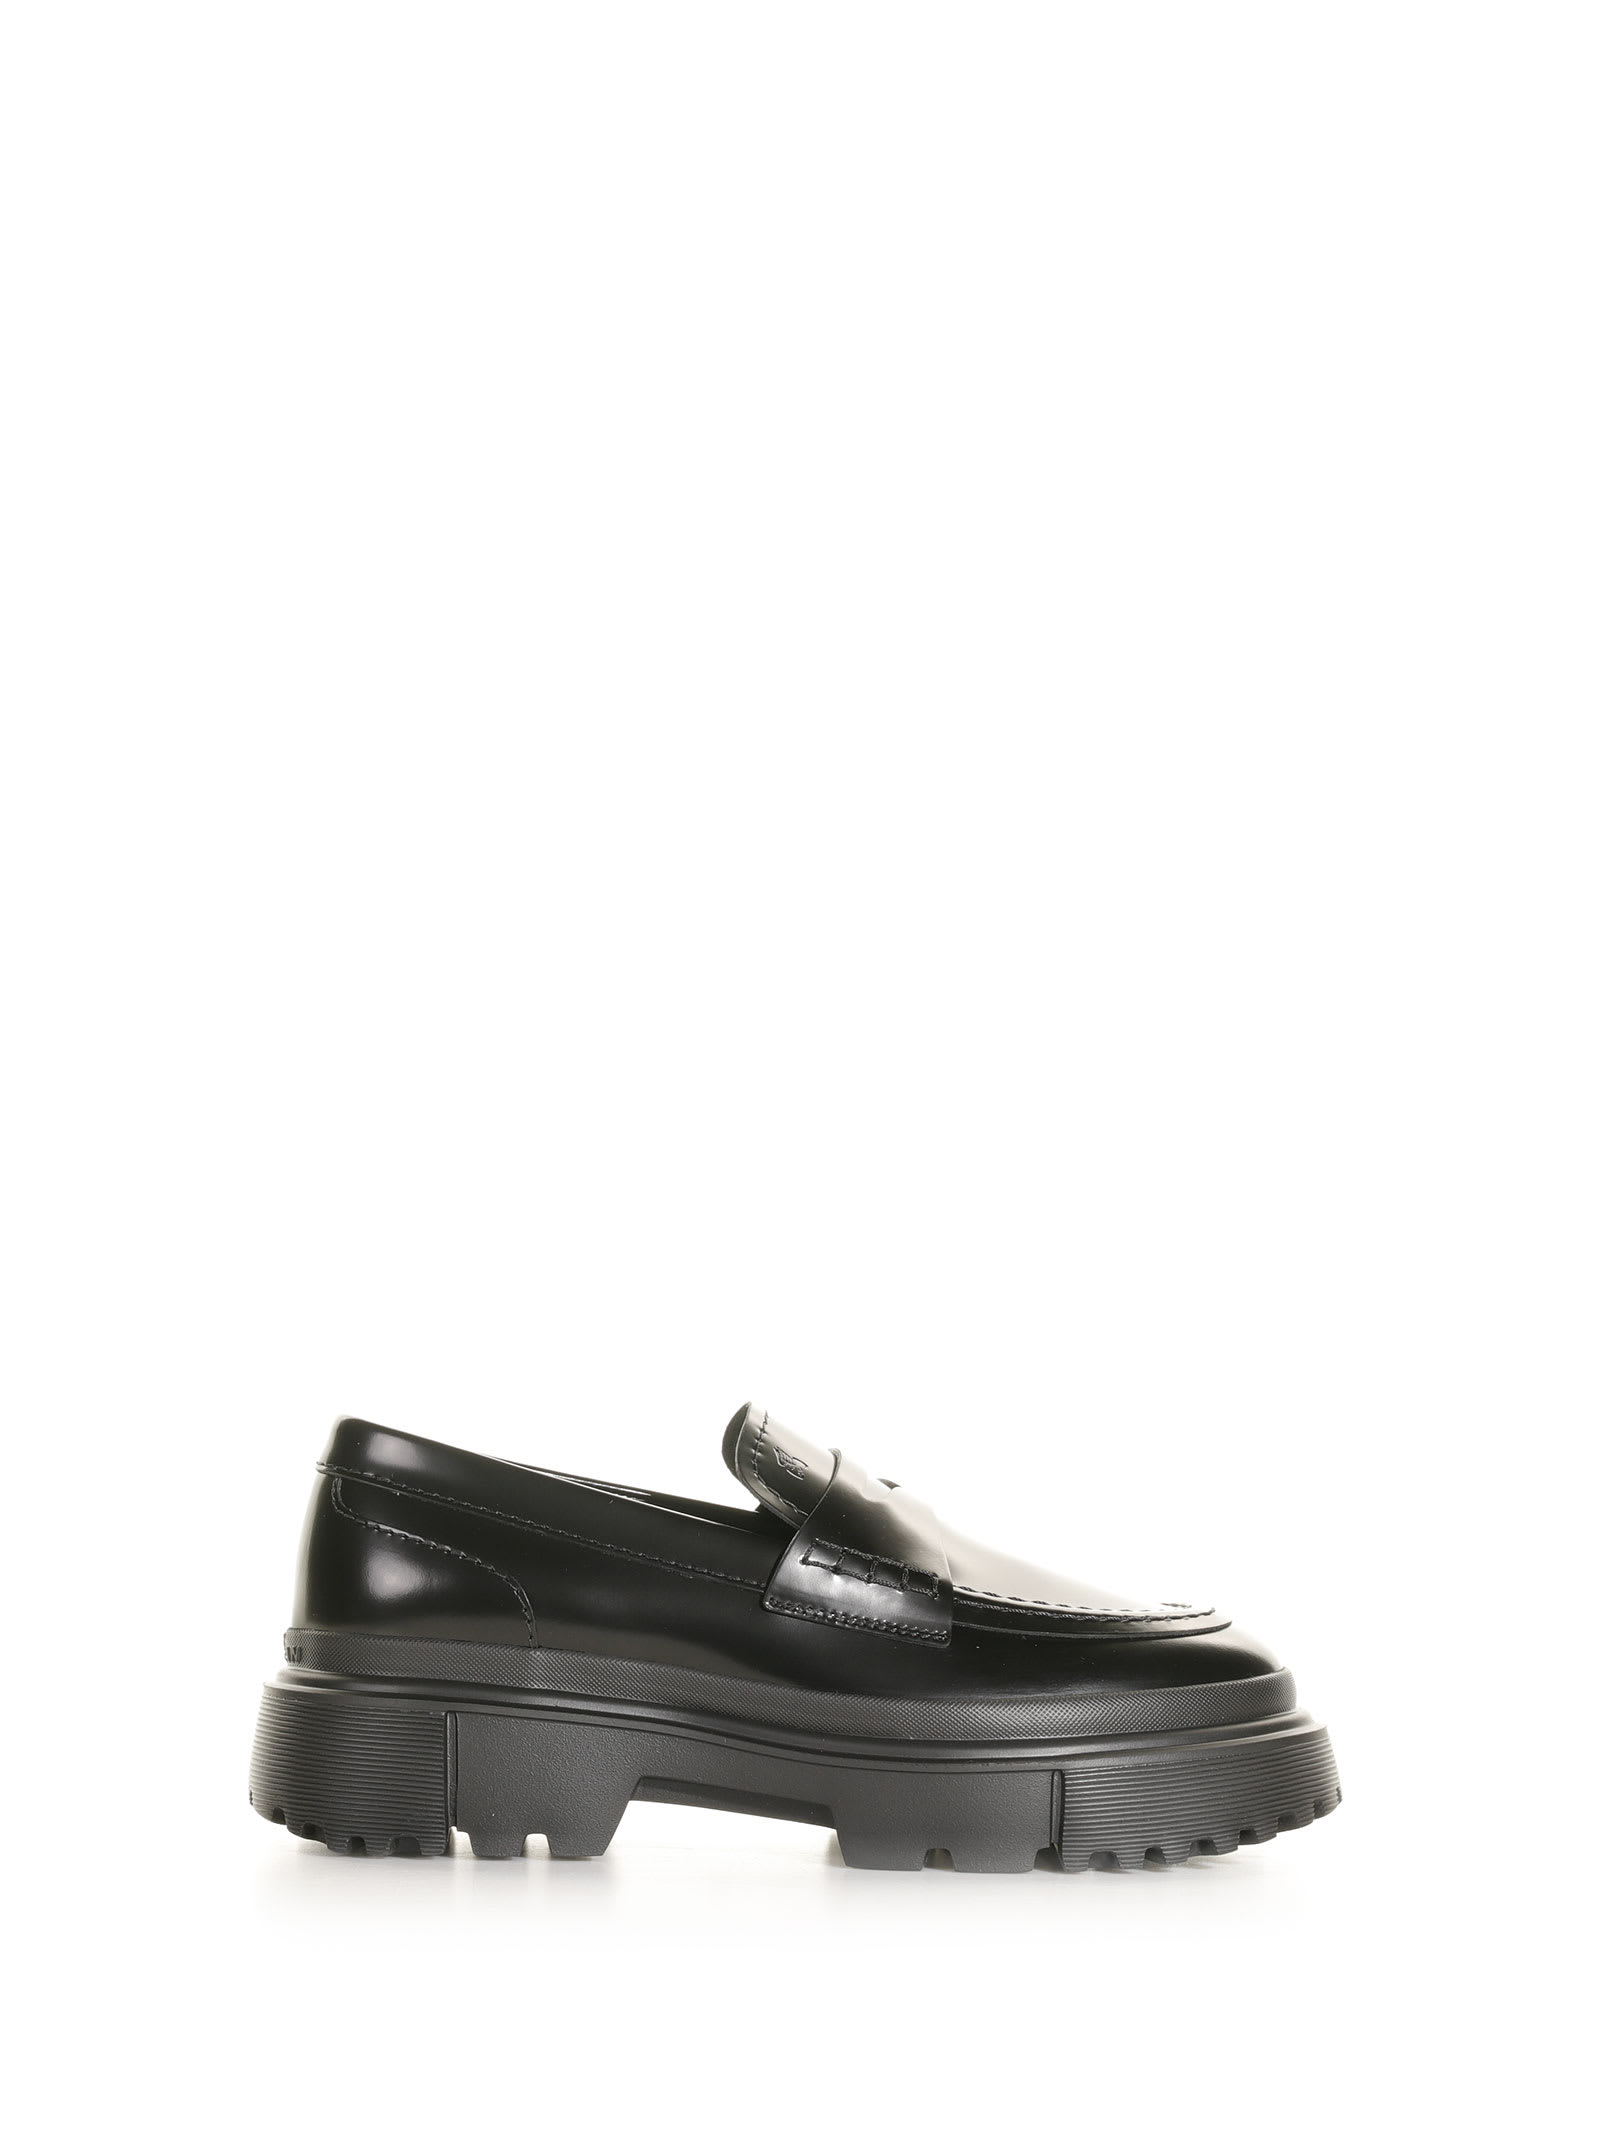 HOGAN H619 LOAFER IN LEATHER